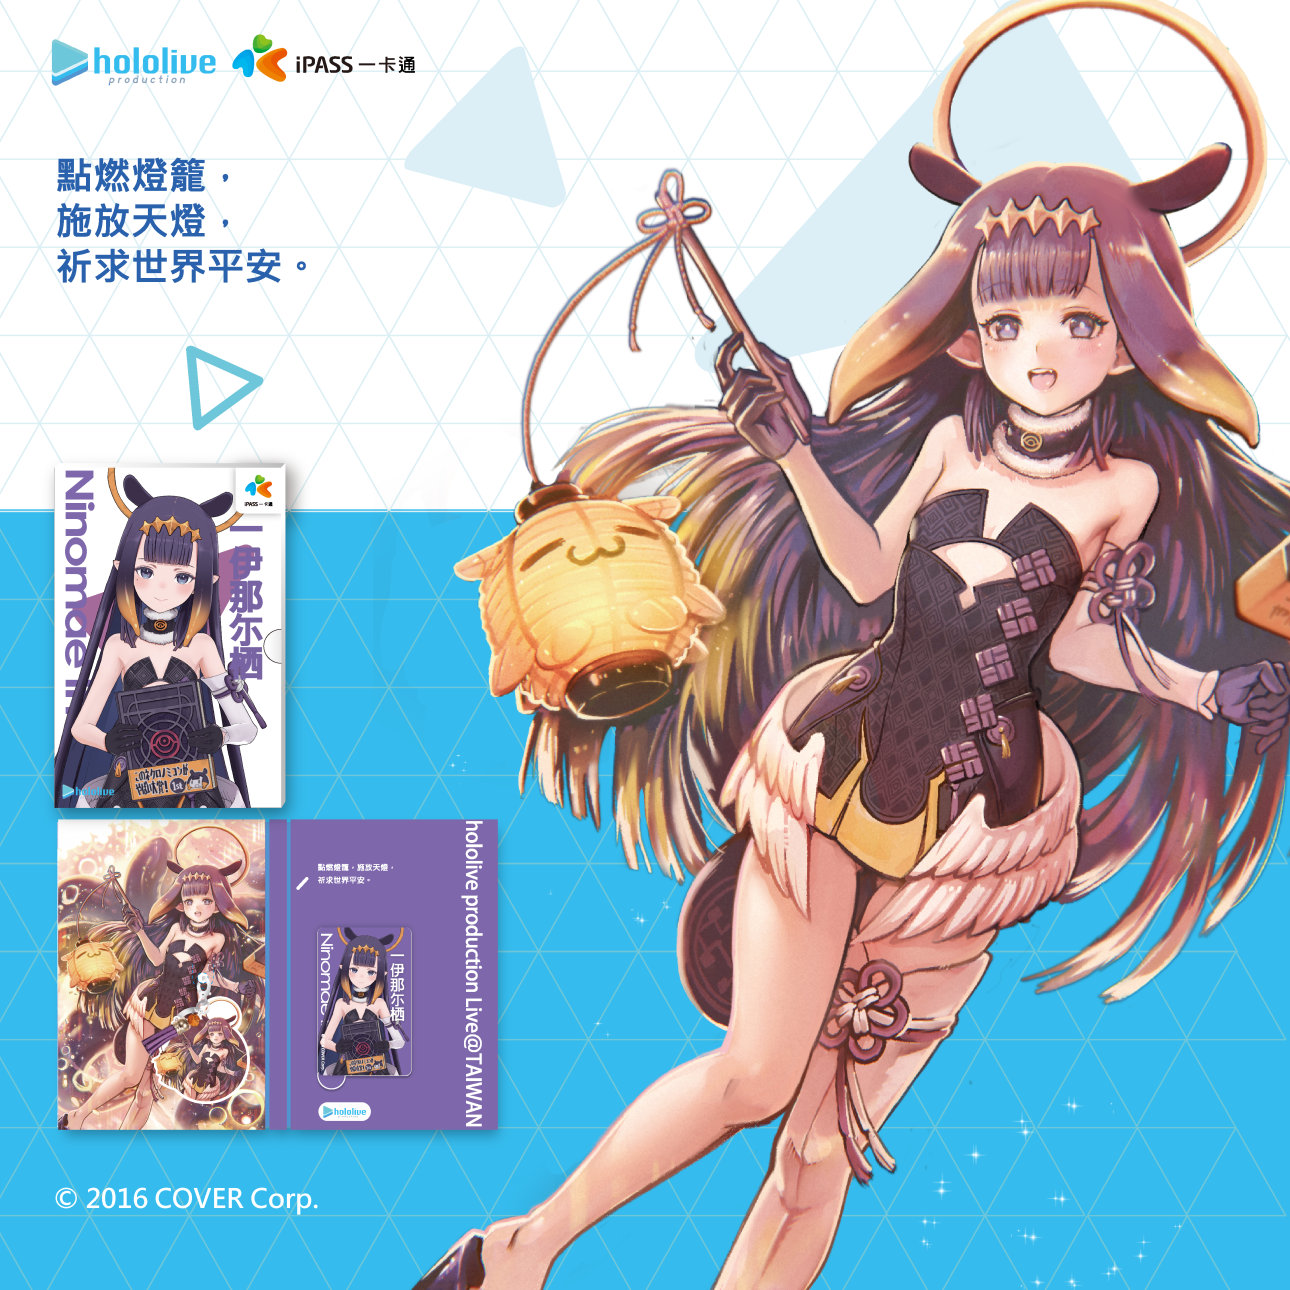 hololive production x iPASS Collaboration Card is Now Available